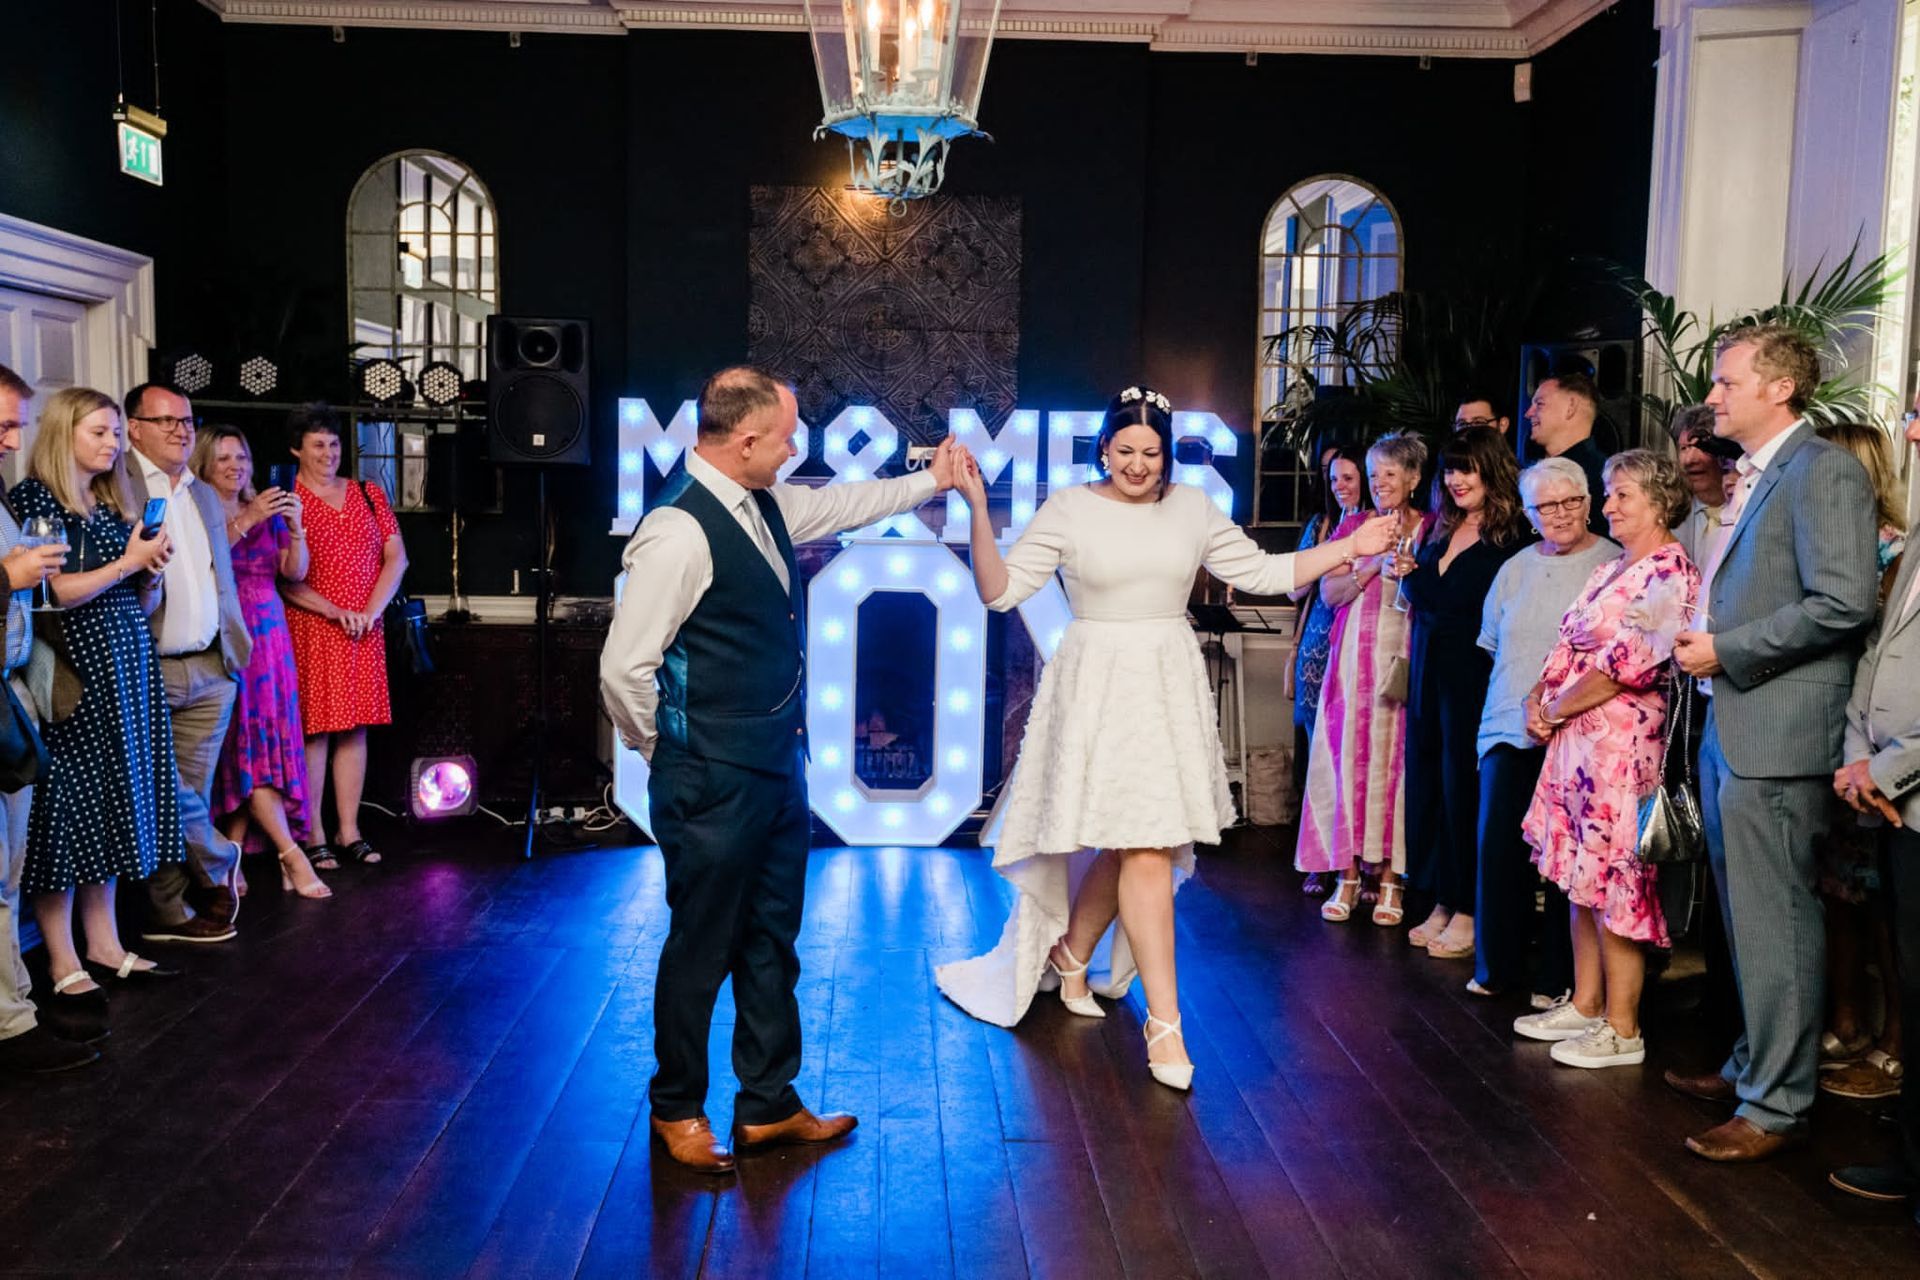 Bride and grooms first dance at 10 Castle Street in Dorset co-ordinated by Tasha Mae Wedding Co-ordinator.